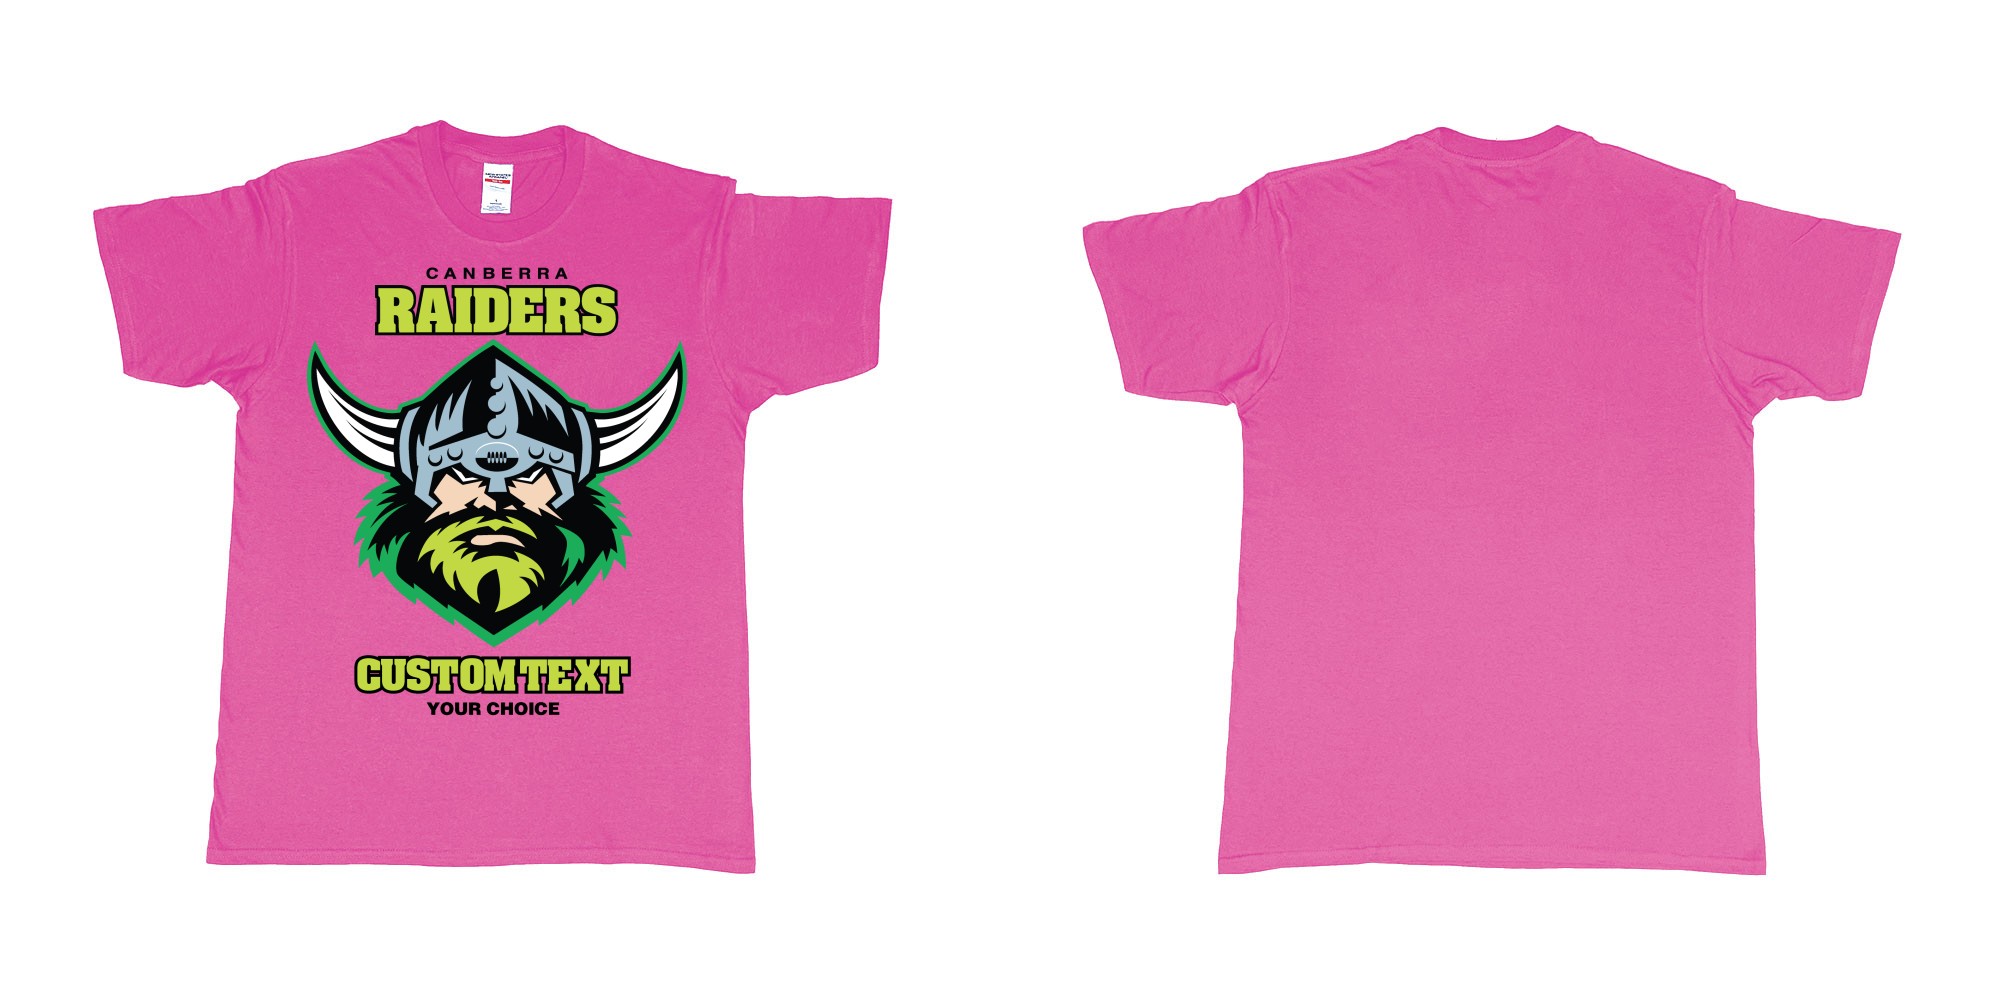 Custom tshirt design canberra raiders nrl logo own printed text near you in fabric color heliconia choice your own text made in Bali by The Pirate Way